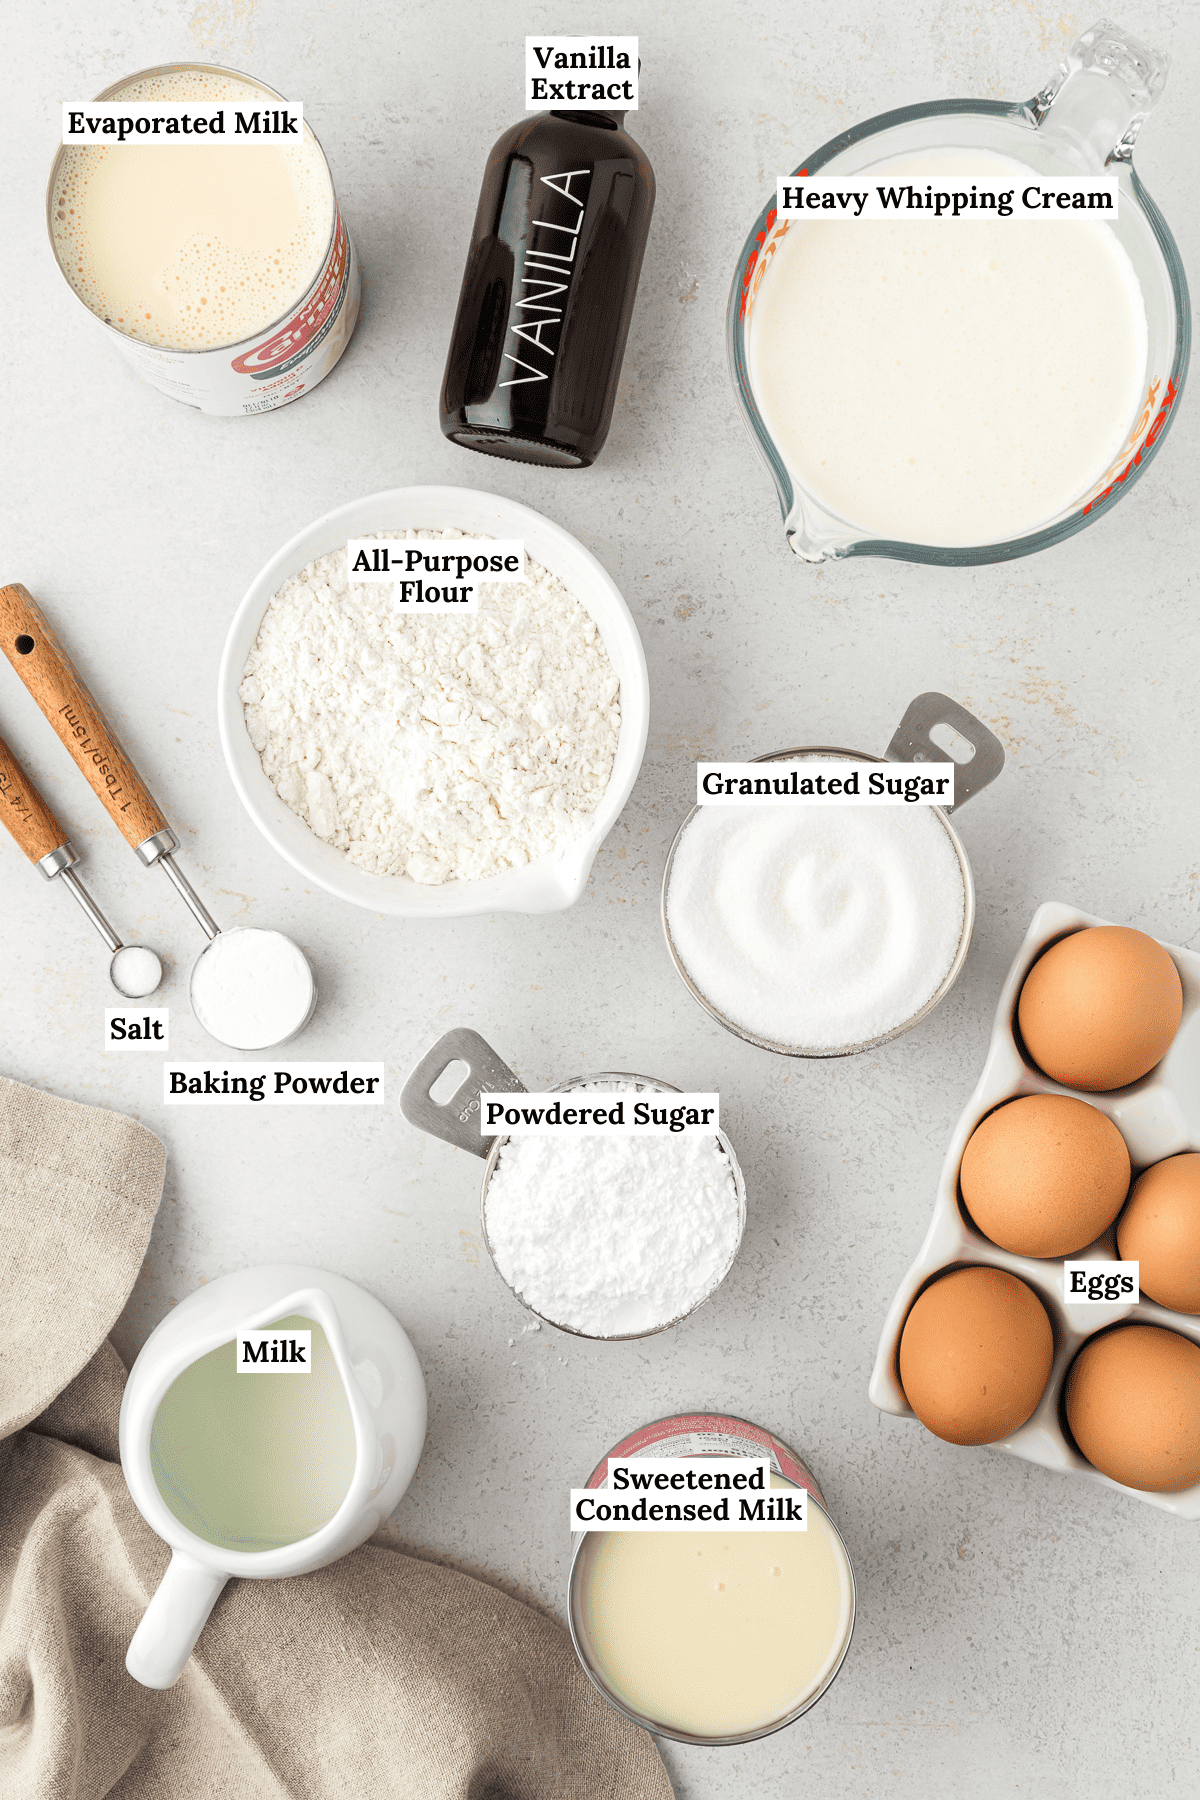 overhead view of the ingredients for tres leches cake including evaporated milk, vanilla extract, heavy whipping cream, all-purpose flour, salt, baking powder, granulated sugar, powdered sugar, milk, sweetended condensed milk, and eggs